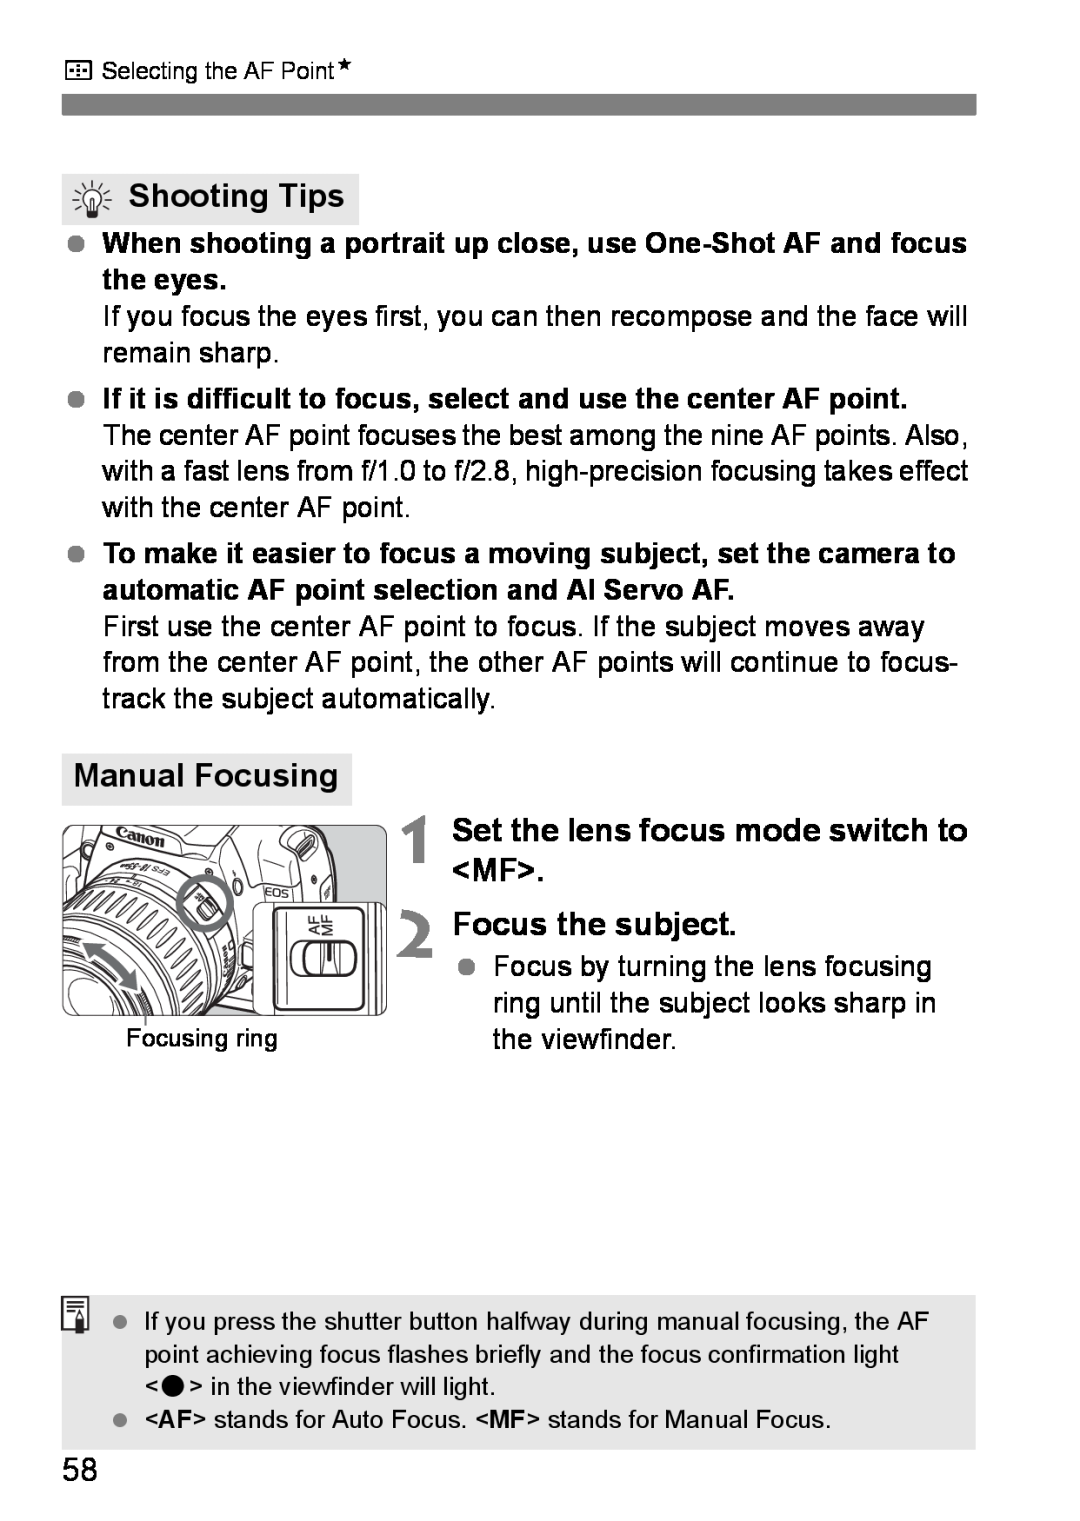 Canon EOS DIGITAL REBEL XTI Manual Focusing, Focus the subject, Shooting Tips, Set the lens focus mode switch to 